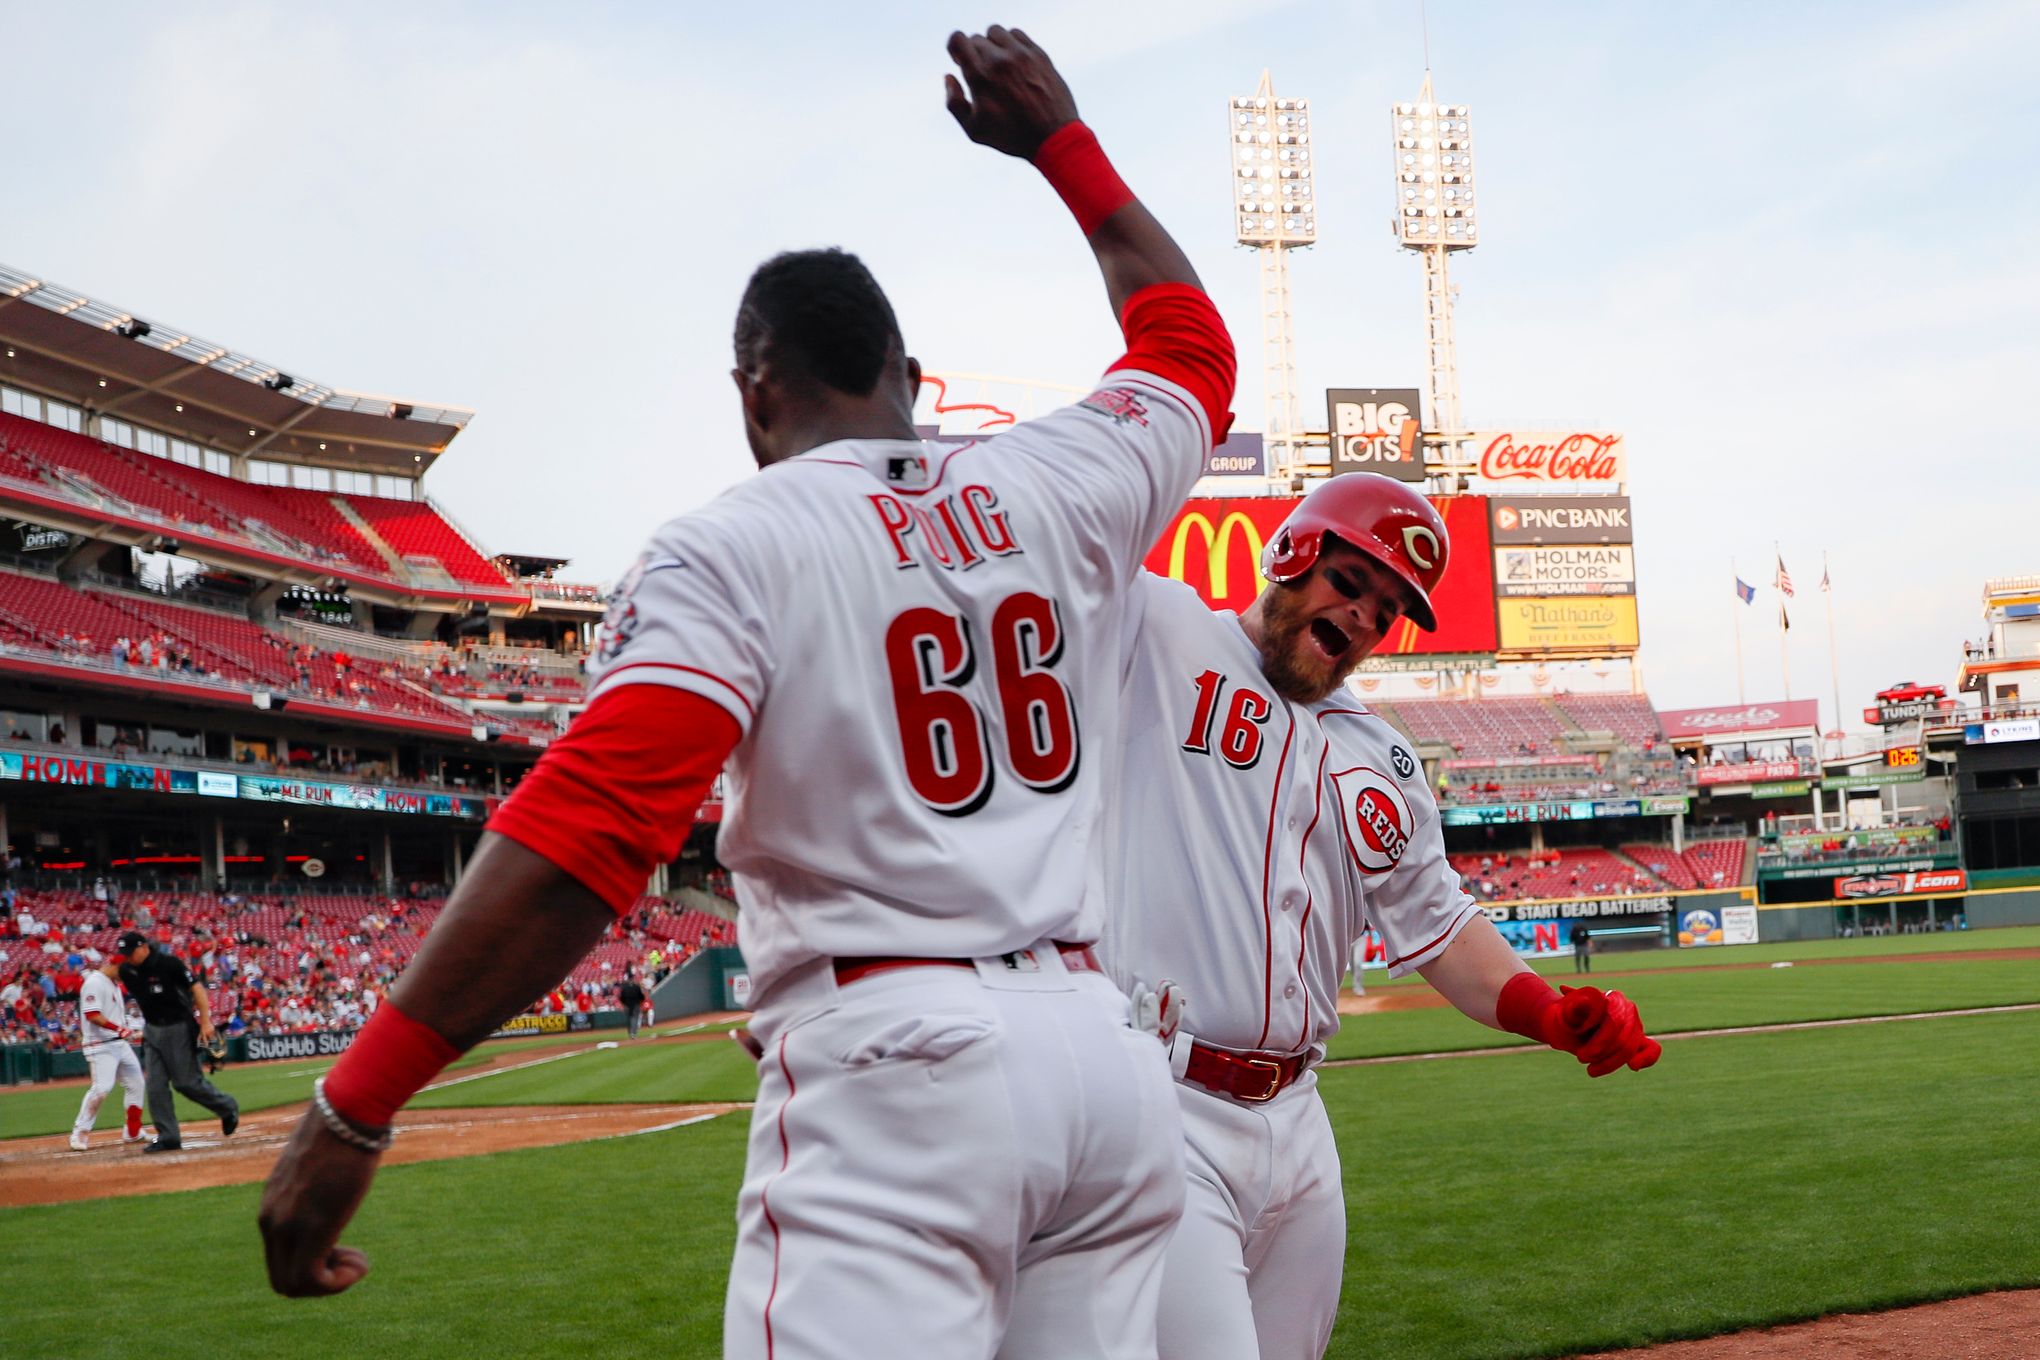 Puig's long homer helps Reds beat Braves 7-6